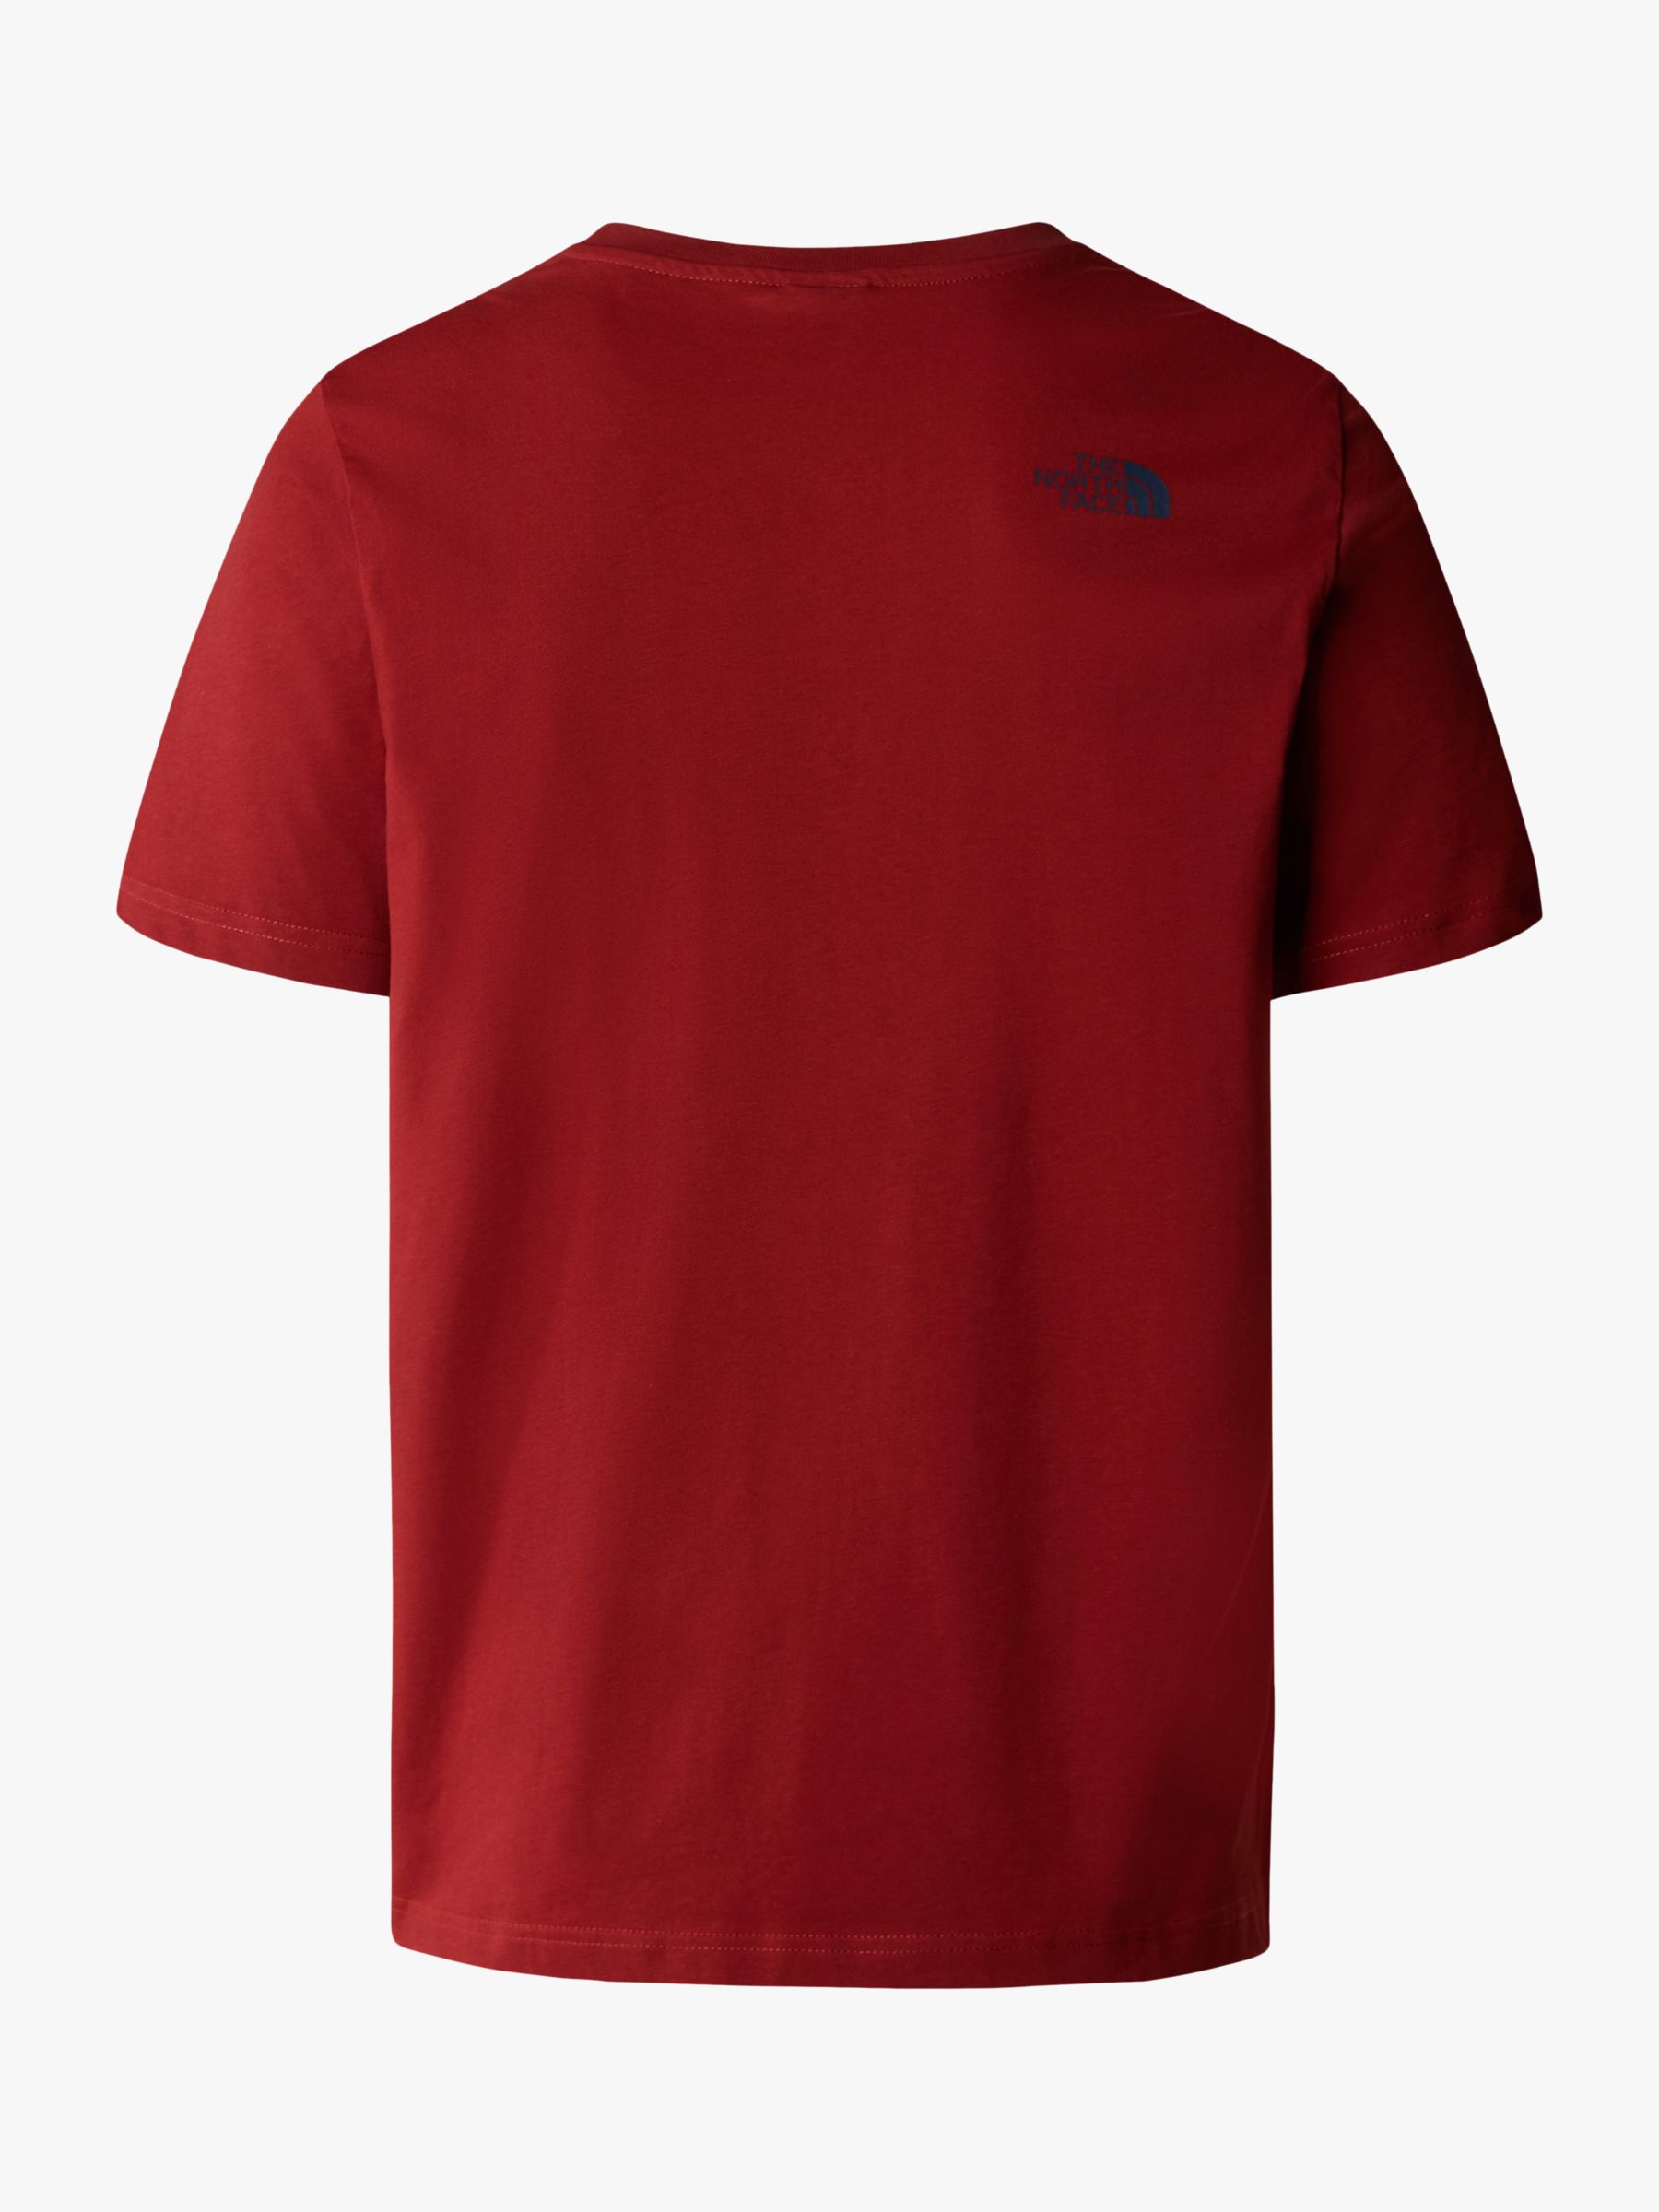 Buy The North Face Short Sleeve Rust T-Shirt, Red Online at johnlewis.com